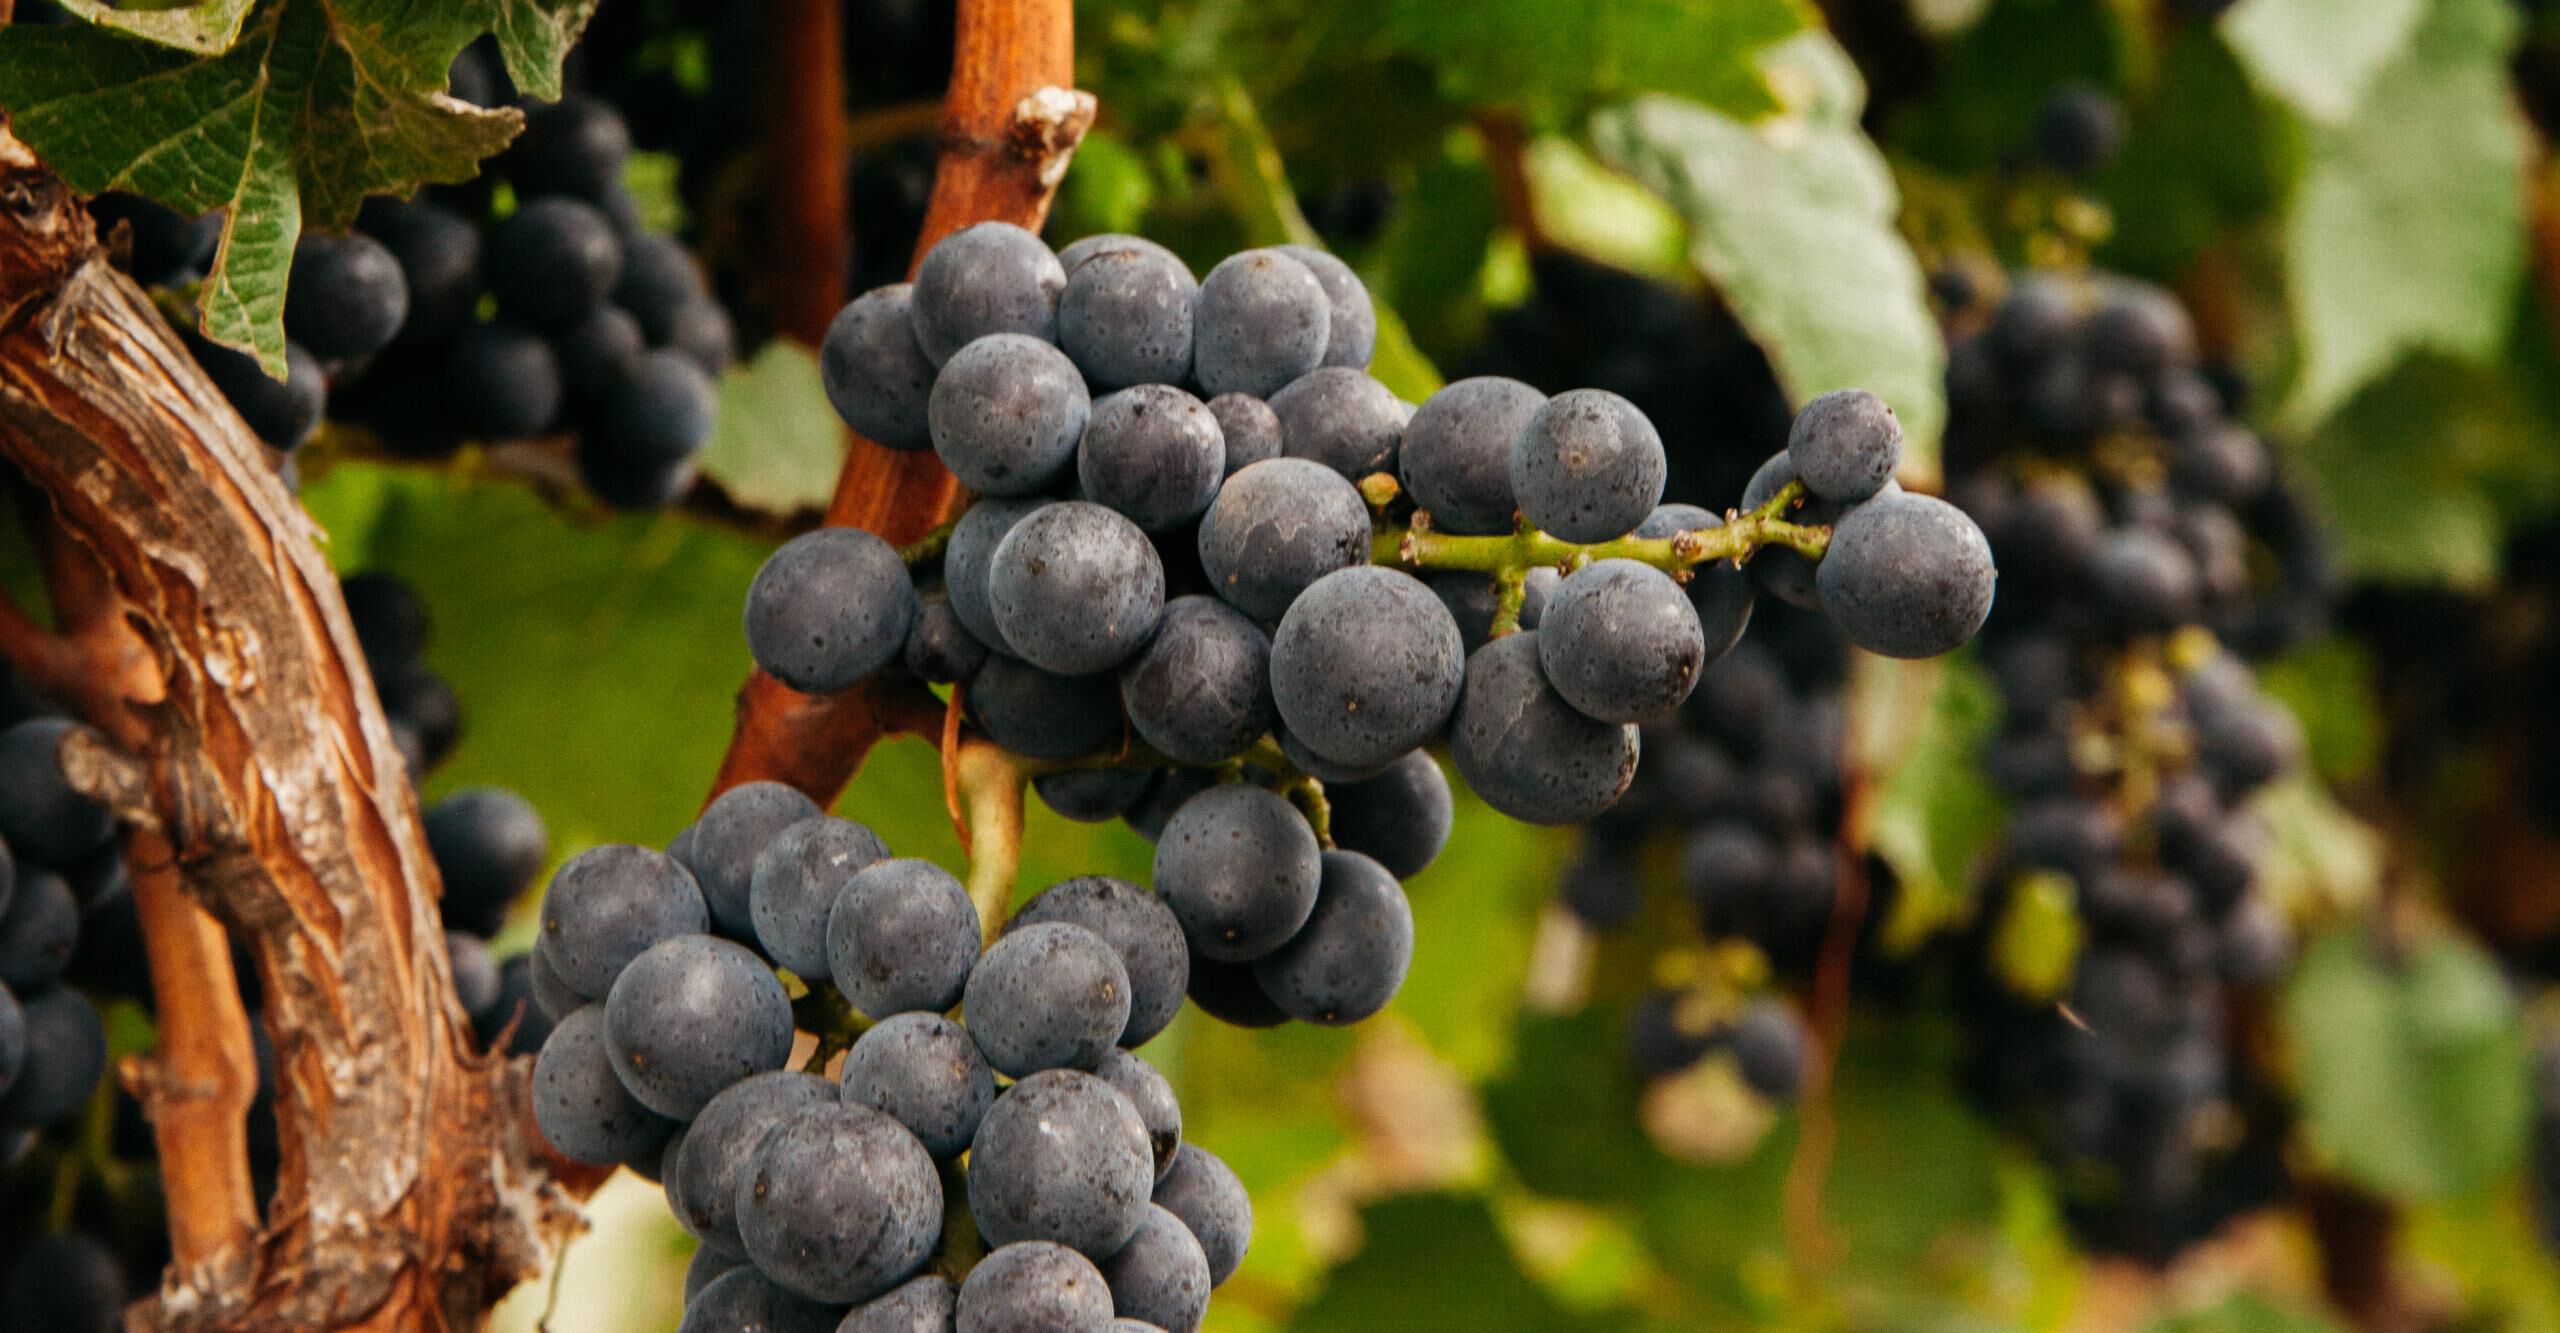 Cluster of Pinot Noir grapes hanging on a vine